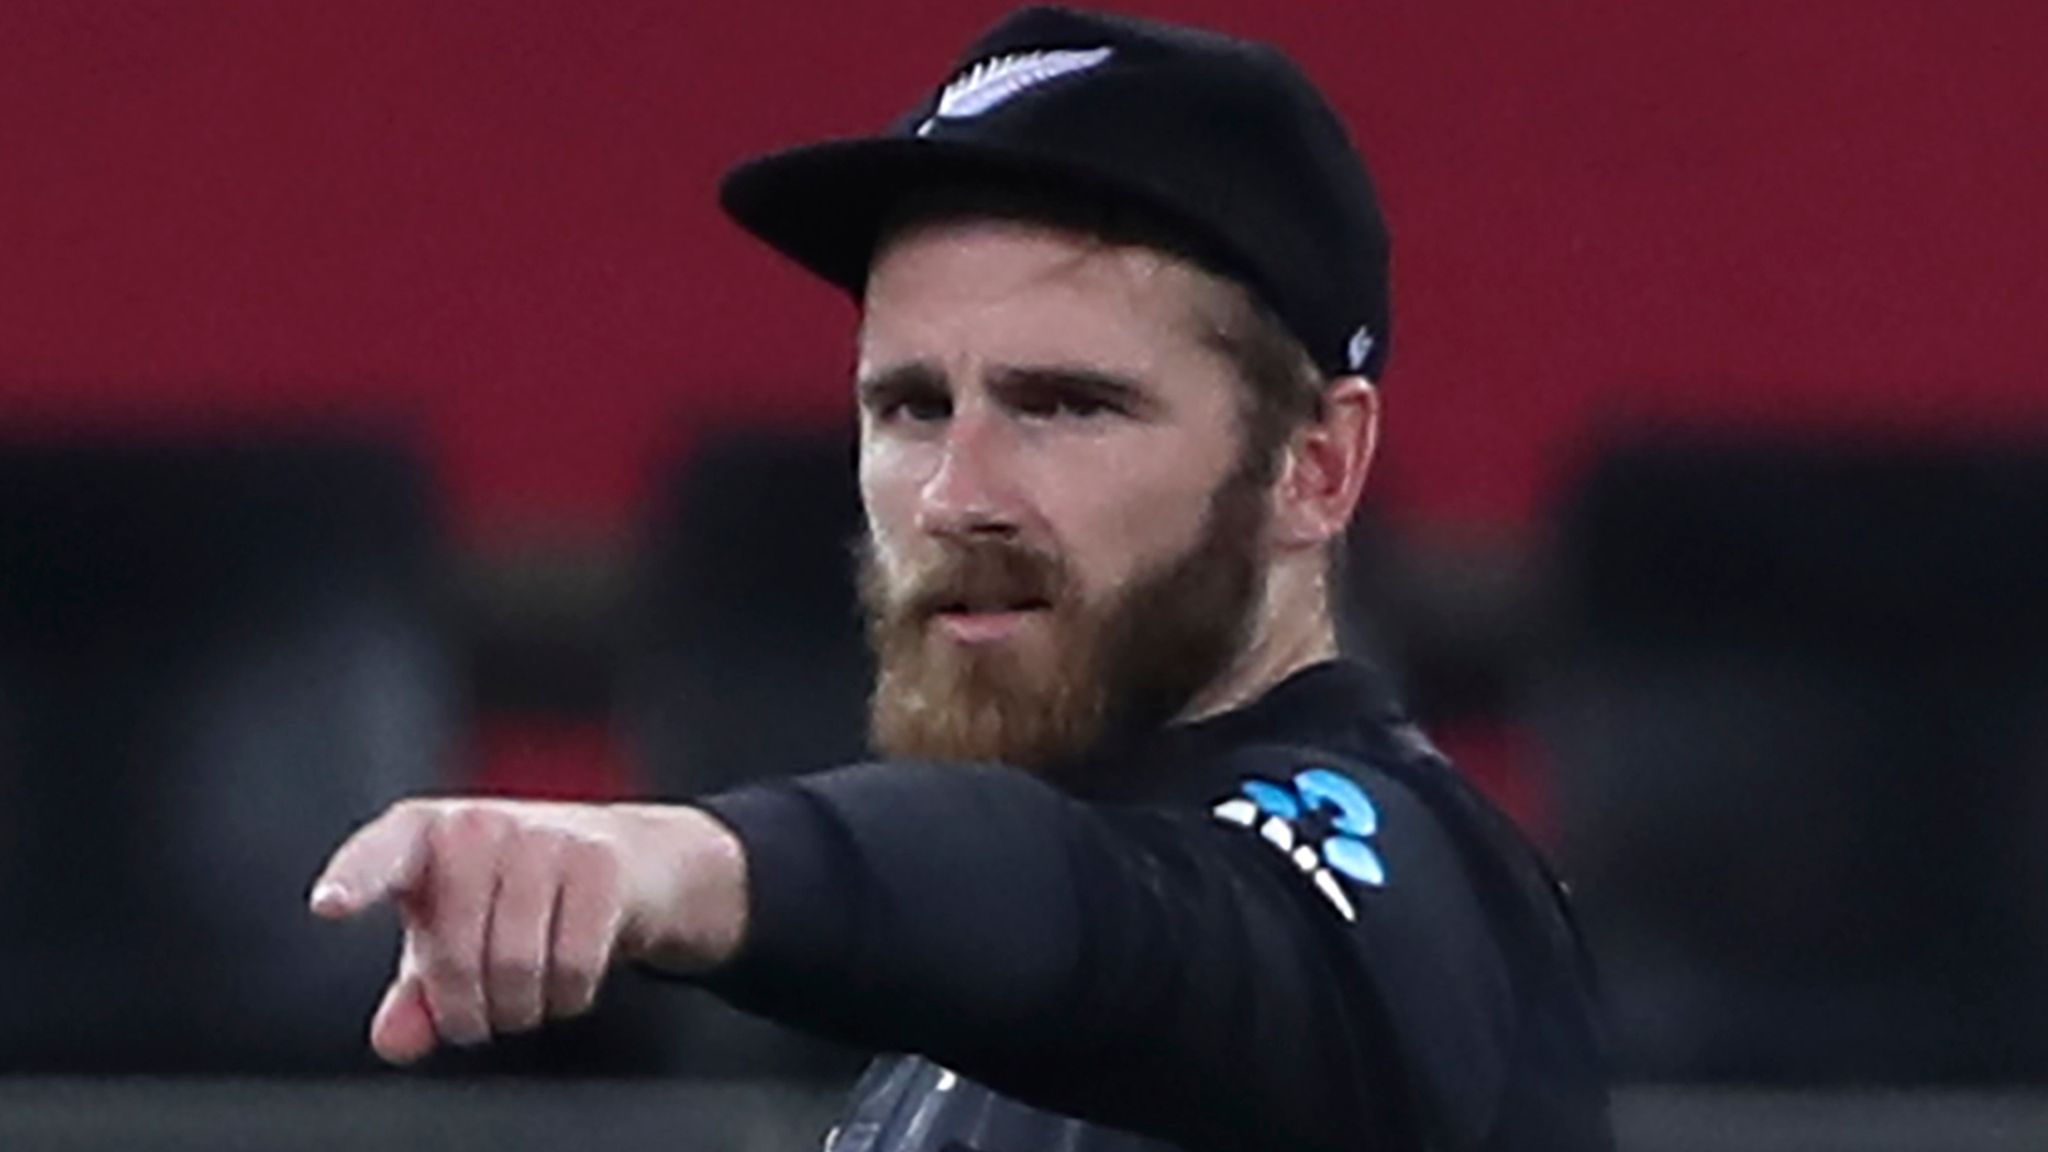 England vs New Zealand: Test-match cricket will help Kane Williamson  rediscover his form, says coach | Cricket News | Sky Sports